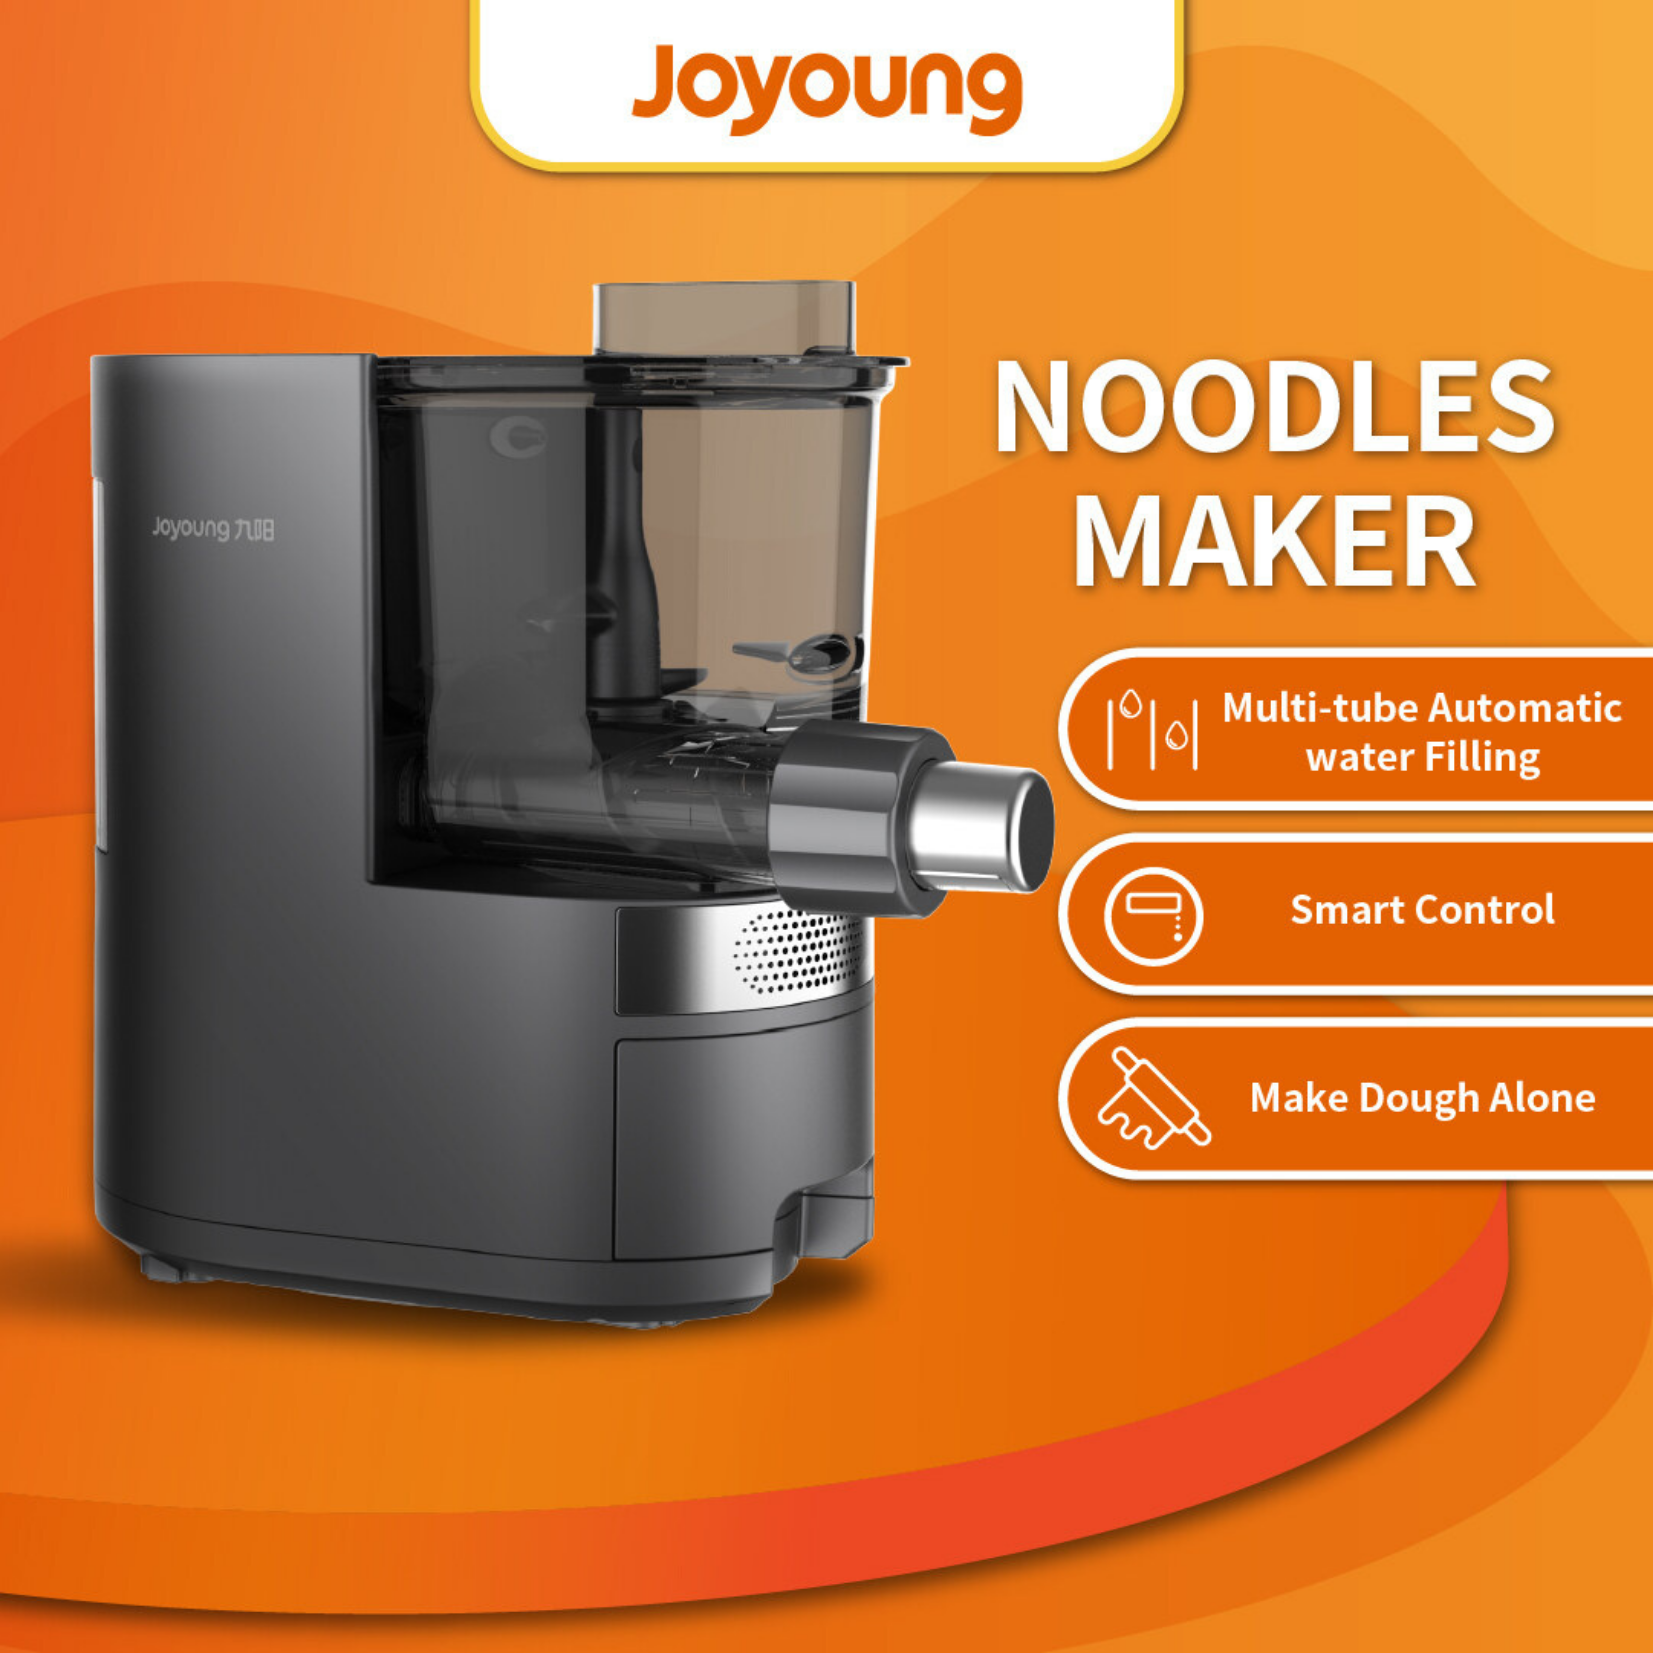 Joyoung Smart Noodles Machine | 7 Kinds Molds | Upgraded Dough Function | Suitable For Making Bread